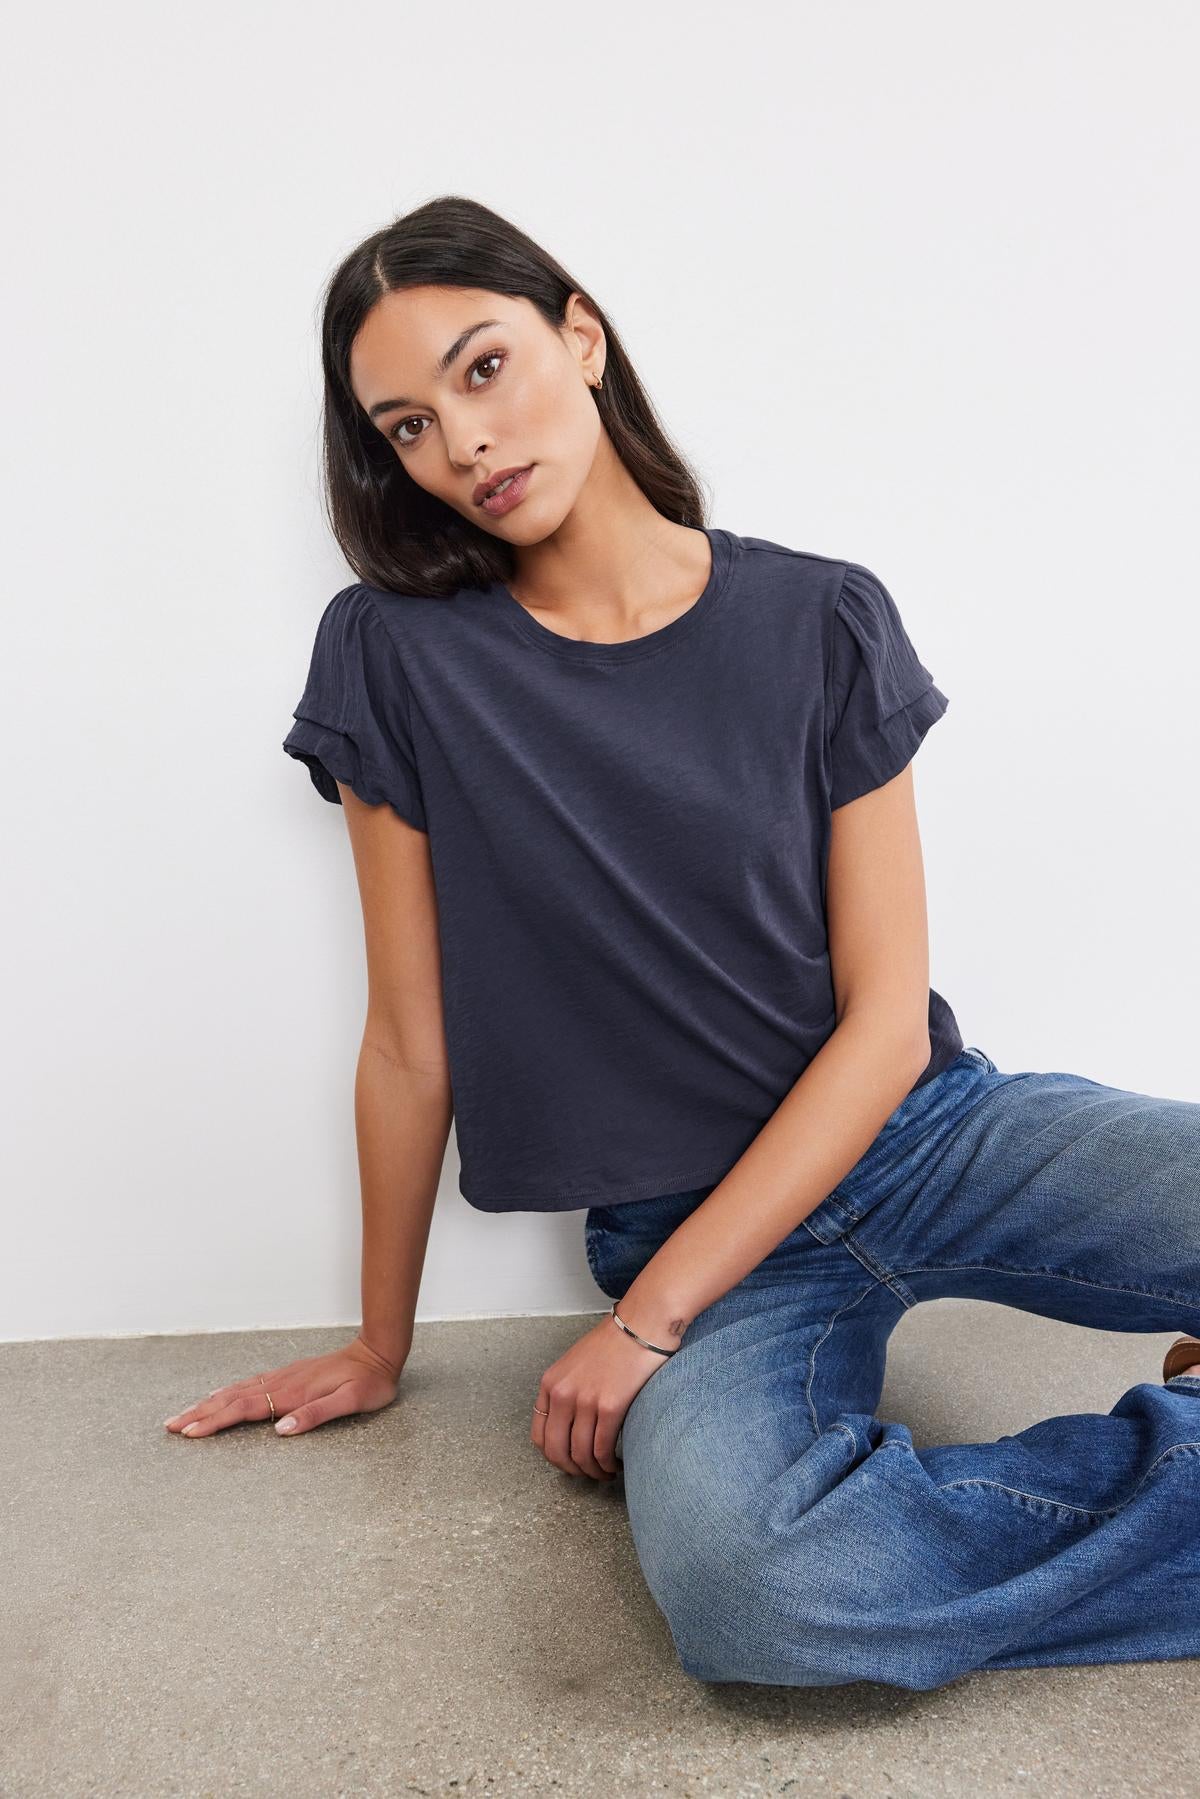 A woman in a grey Velvet by Graham & Spencer DELLA TEE with pleated sleeve detail and blue jeans sitting on the floor against a white background, looking at the camera.-36805187240129